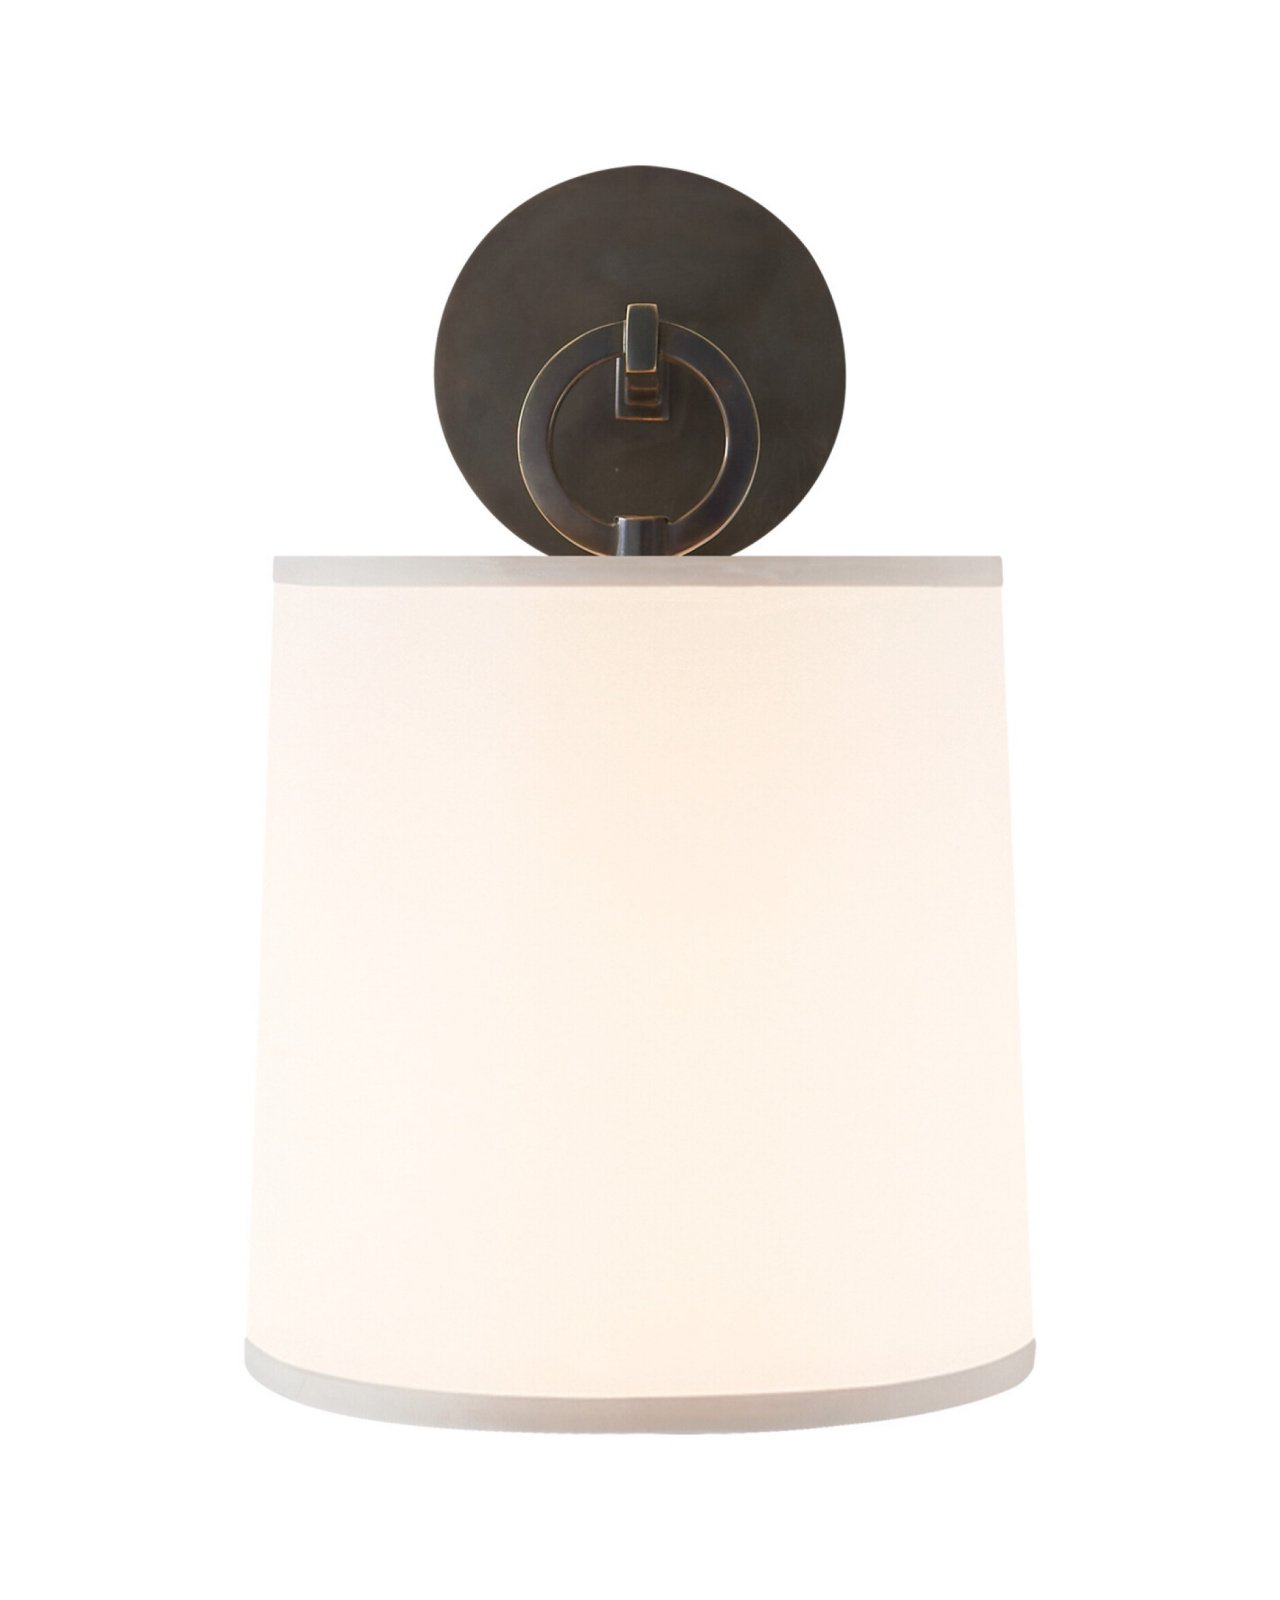 French Cuff vegglampe bronse OUTLET